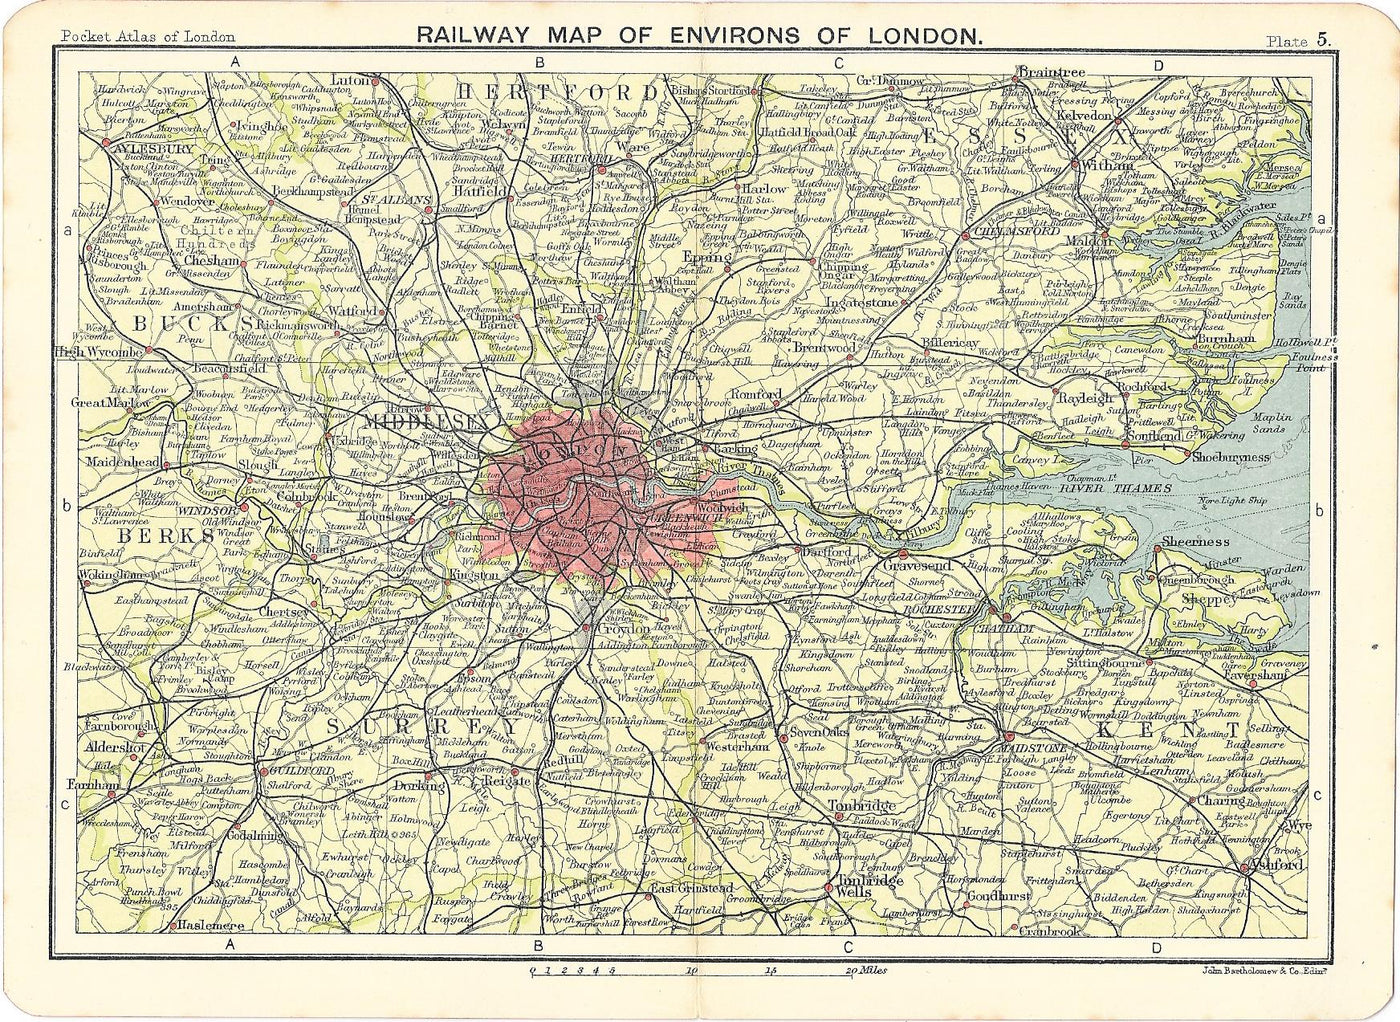 Railway map of London and Environs